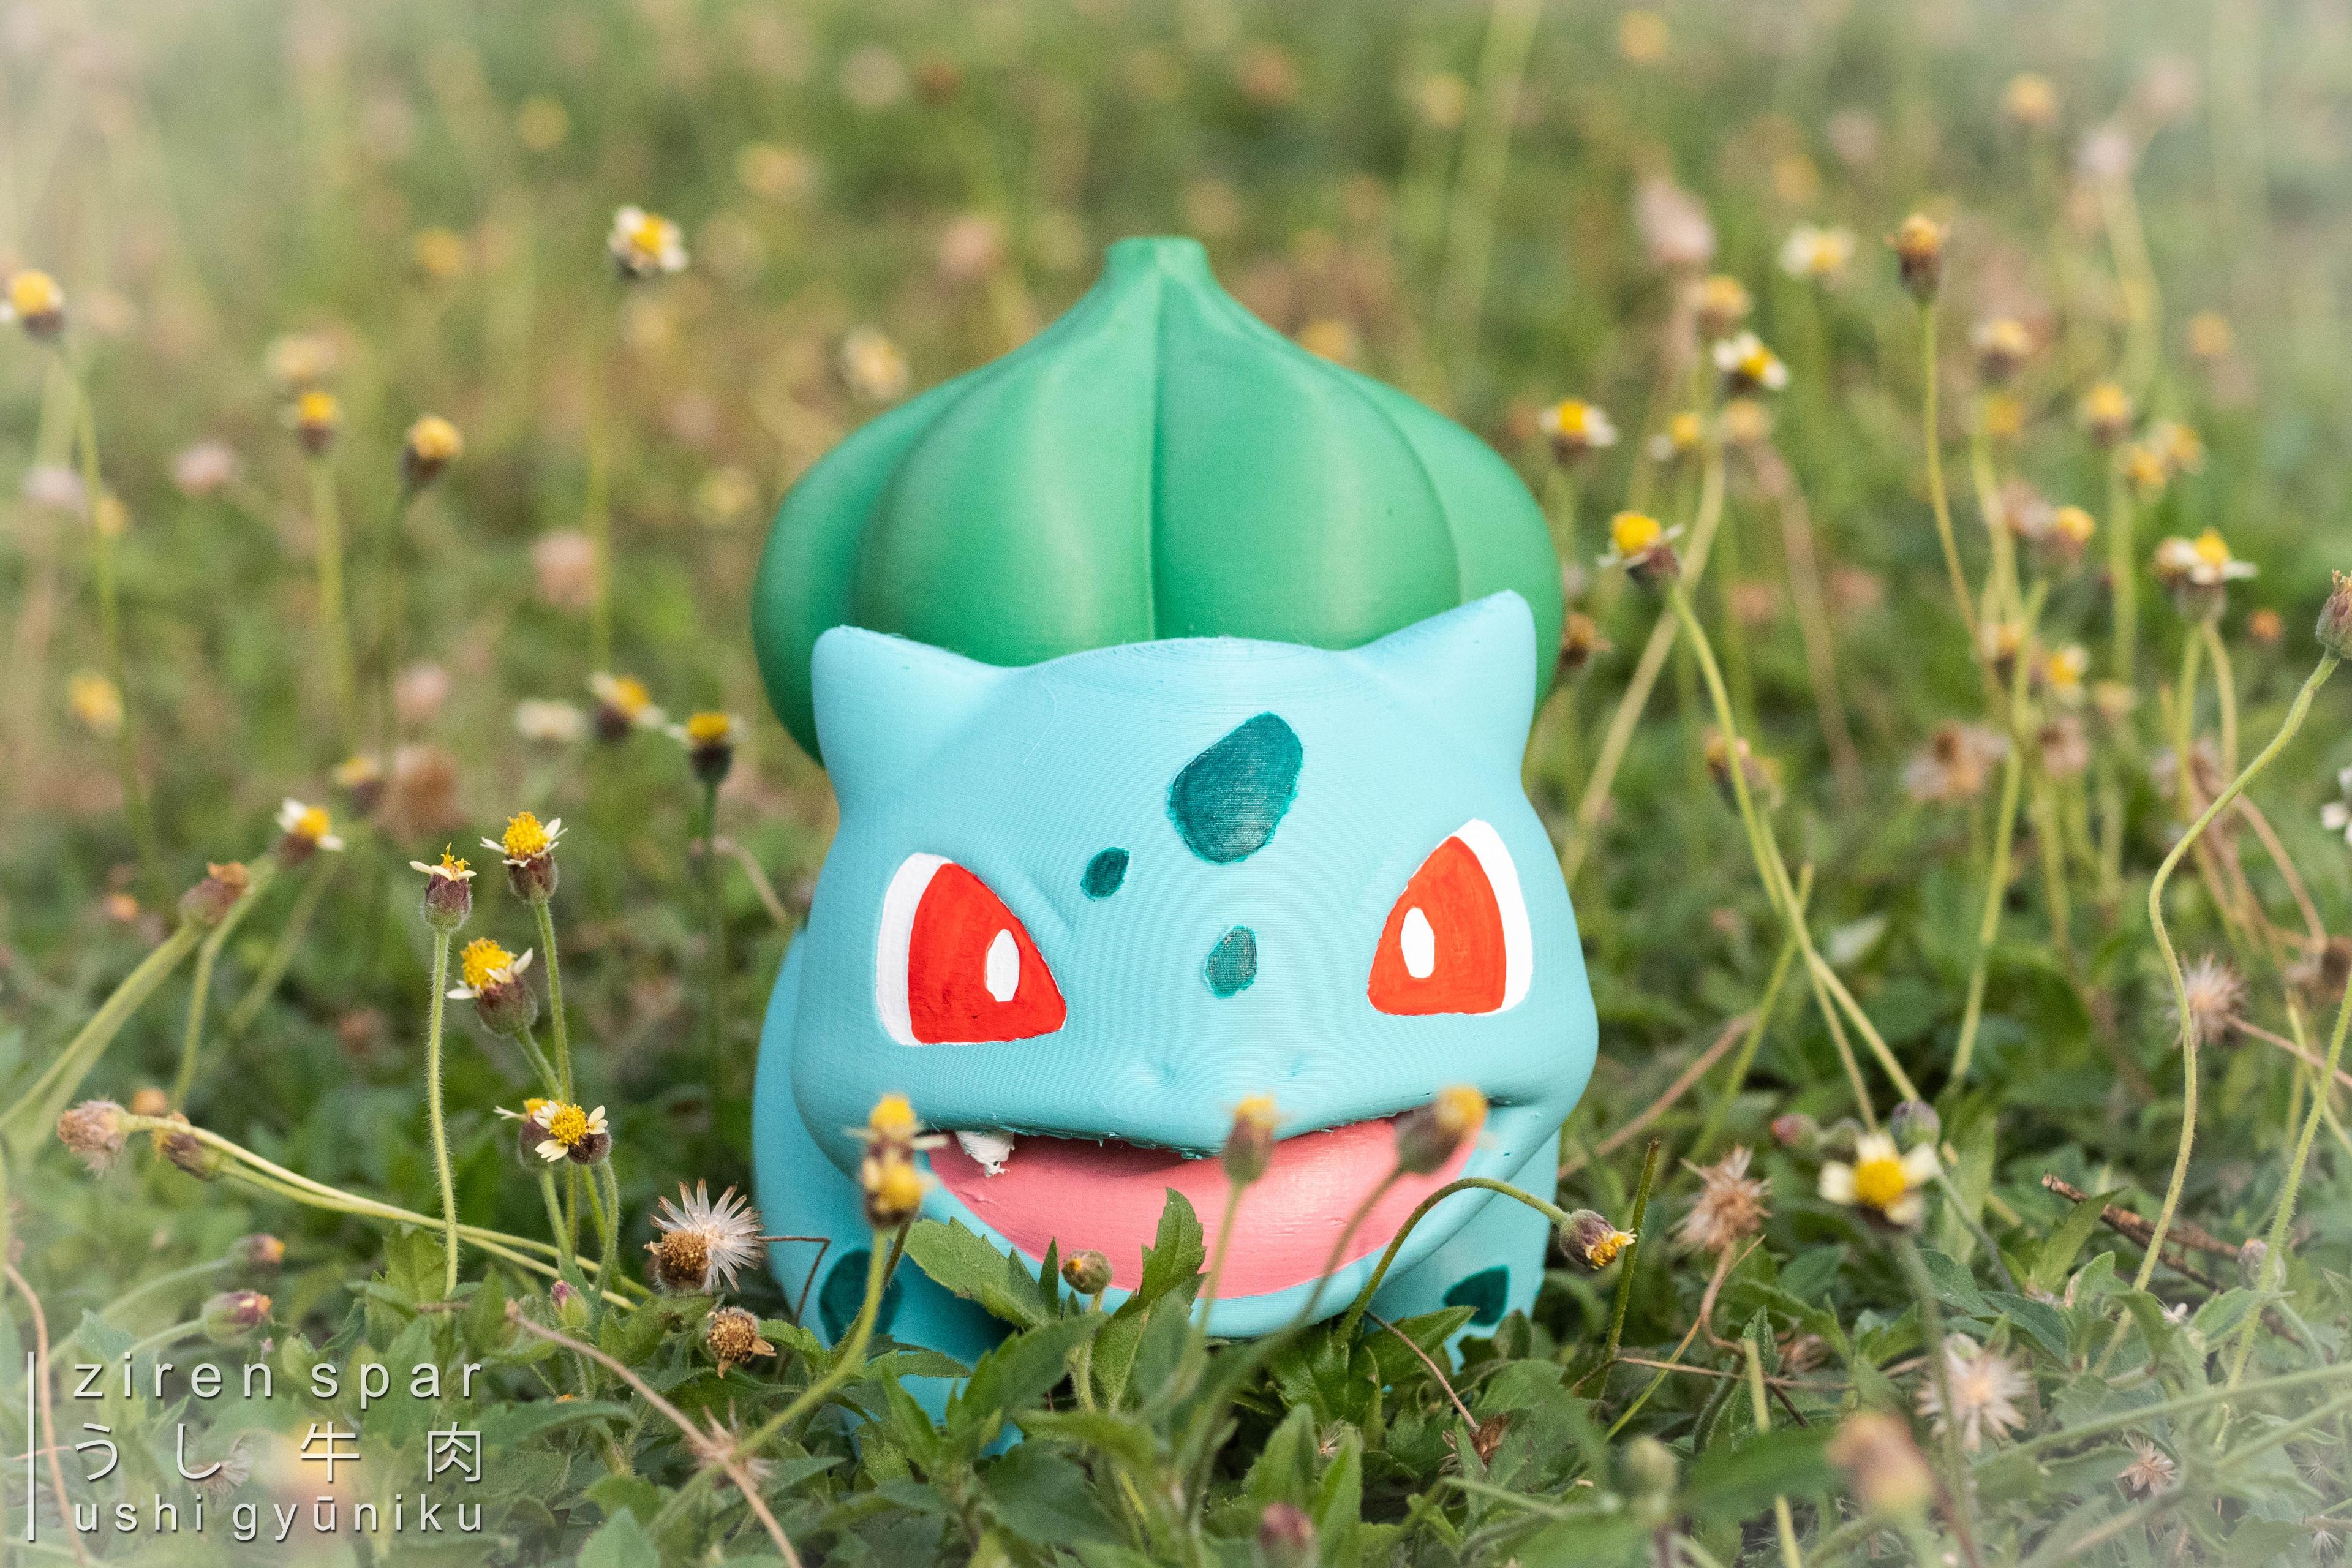 Bulbasaur(Pokemon) - happy #pokémonDay!
kanto starters will always be special💝💝💝
🧵 polymaker 🤍💙💚💙
🖨️ creality ender 3 pro w/ capricorn tube
📸 gears: niichan 
🧩 assist: touchan & kāchan
🐮 painting & photos by yours truly
#FilamentFebruary - 3d model